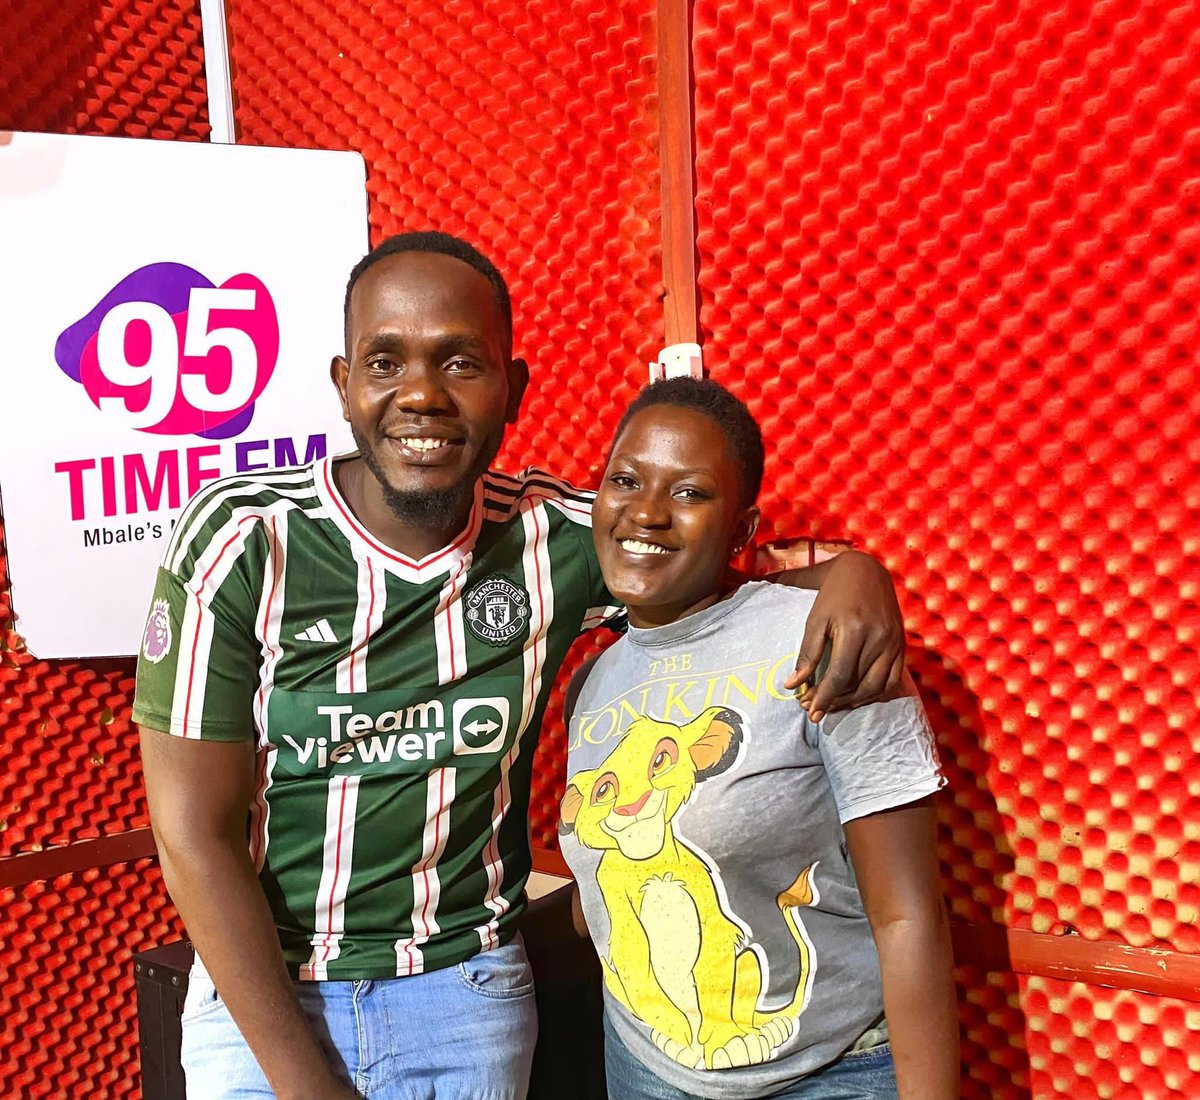 #WinnerWednesday is spicy and #TimeTaxi 🚕💨hits the road to make it more fun. @isaacdarlintone and @bouffmamie are taking you home. 

Have you been invited for Eid or you’ve learnt a lesson? 
📲0757 800 500
#HappyEidMubarak #MbalesNumberOne